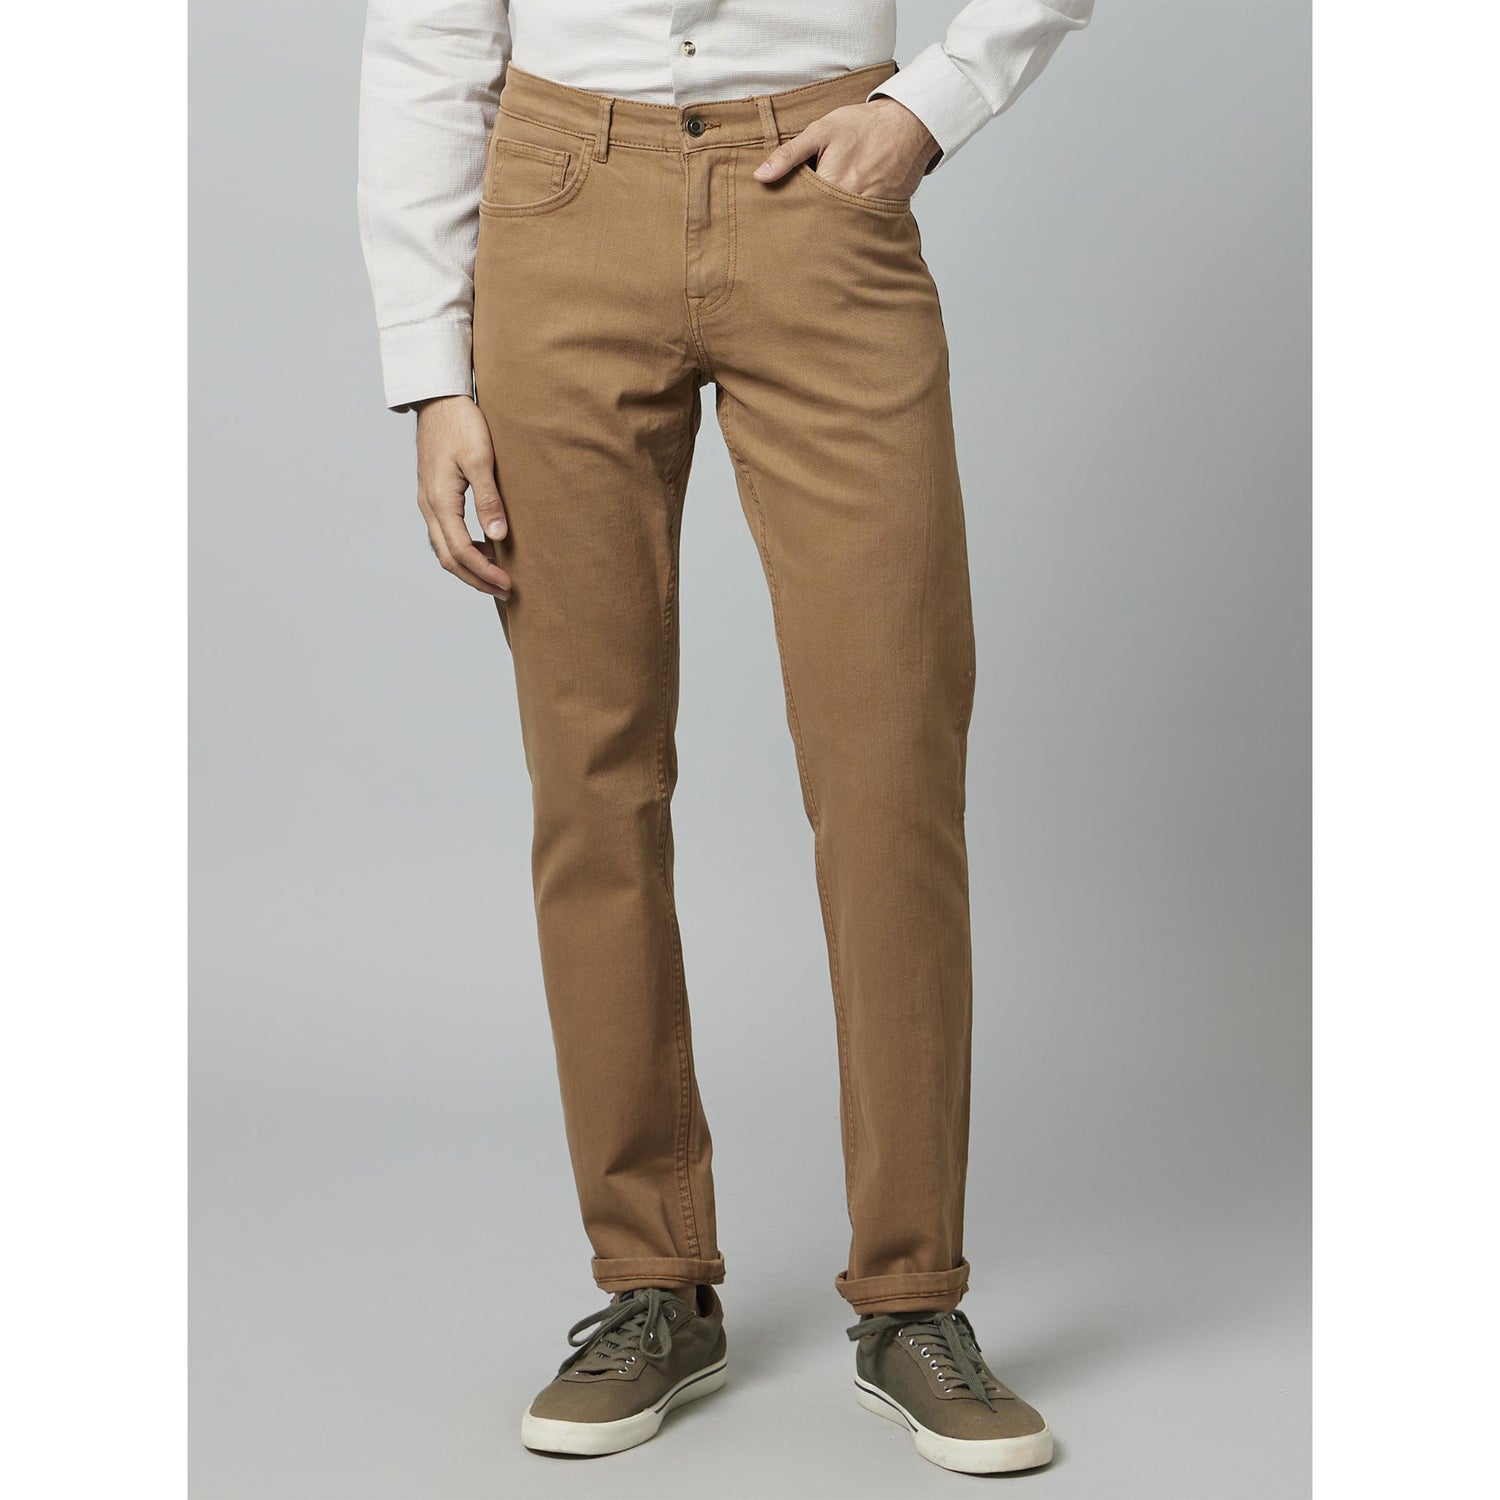 Khaki Solid Cotton Jean Straight Fit Stretchable Jeans (VOPRY1)